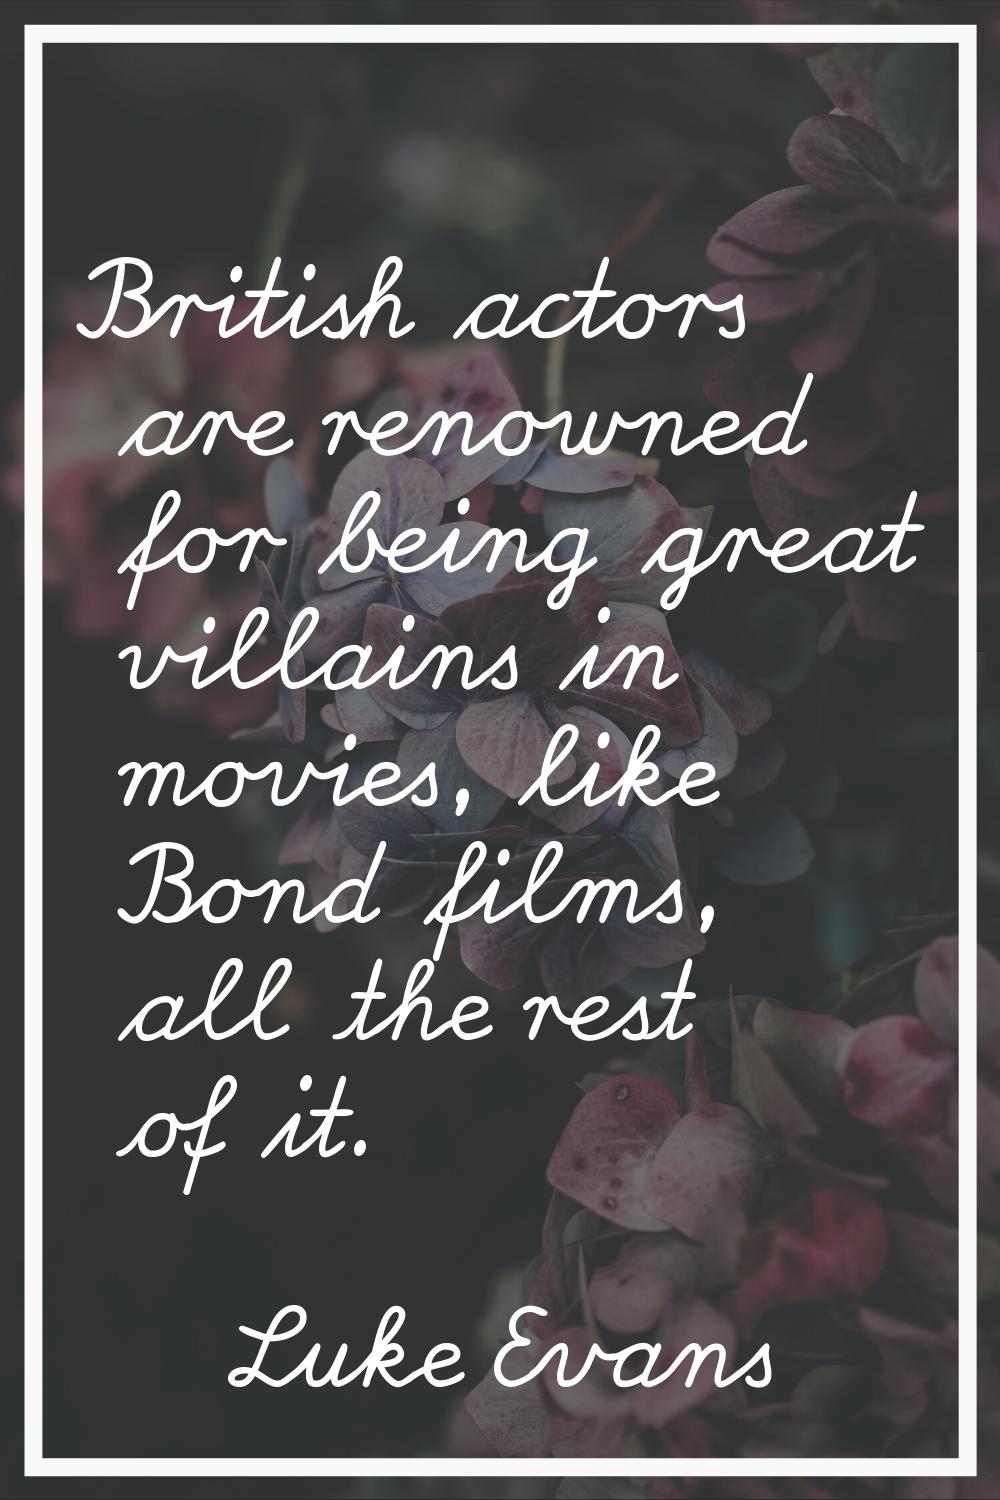 British actors are renowned for being great villains in movies, like Bond films, all the rest of it